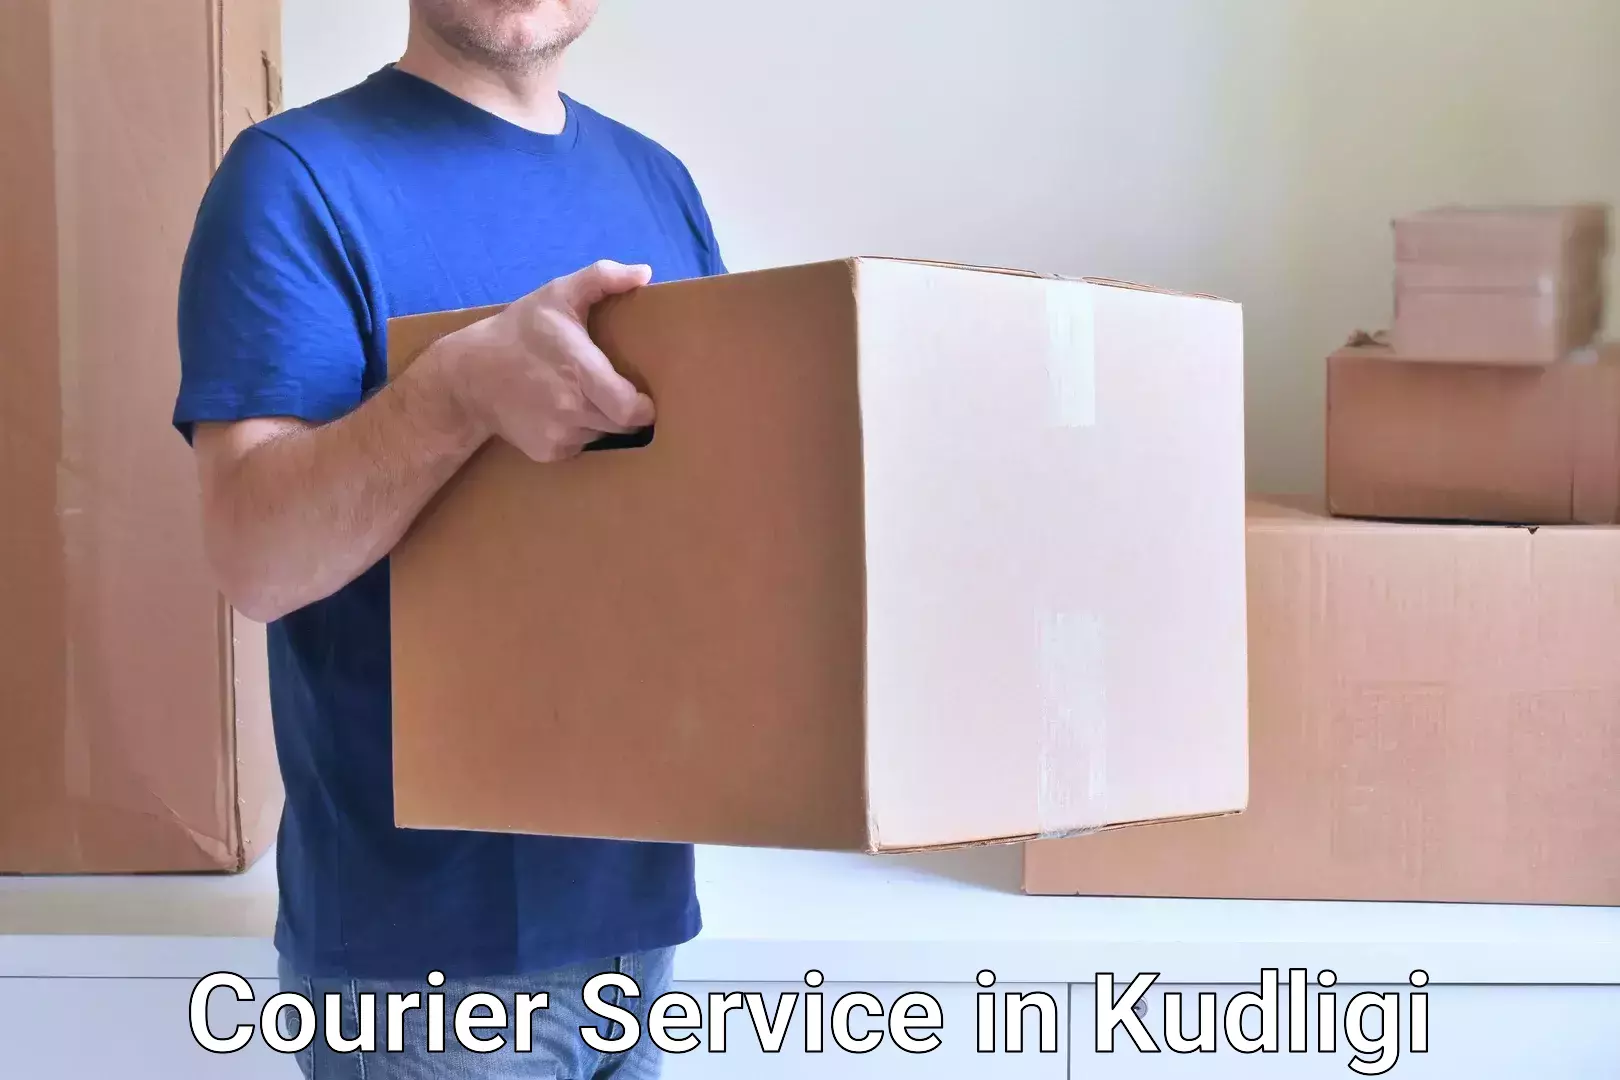 Round-the-clock parcel delivery in Kudligi